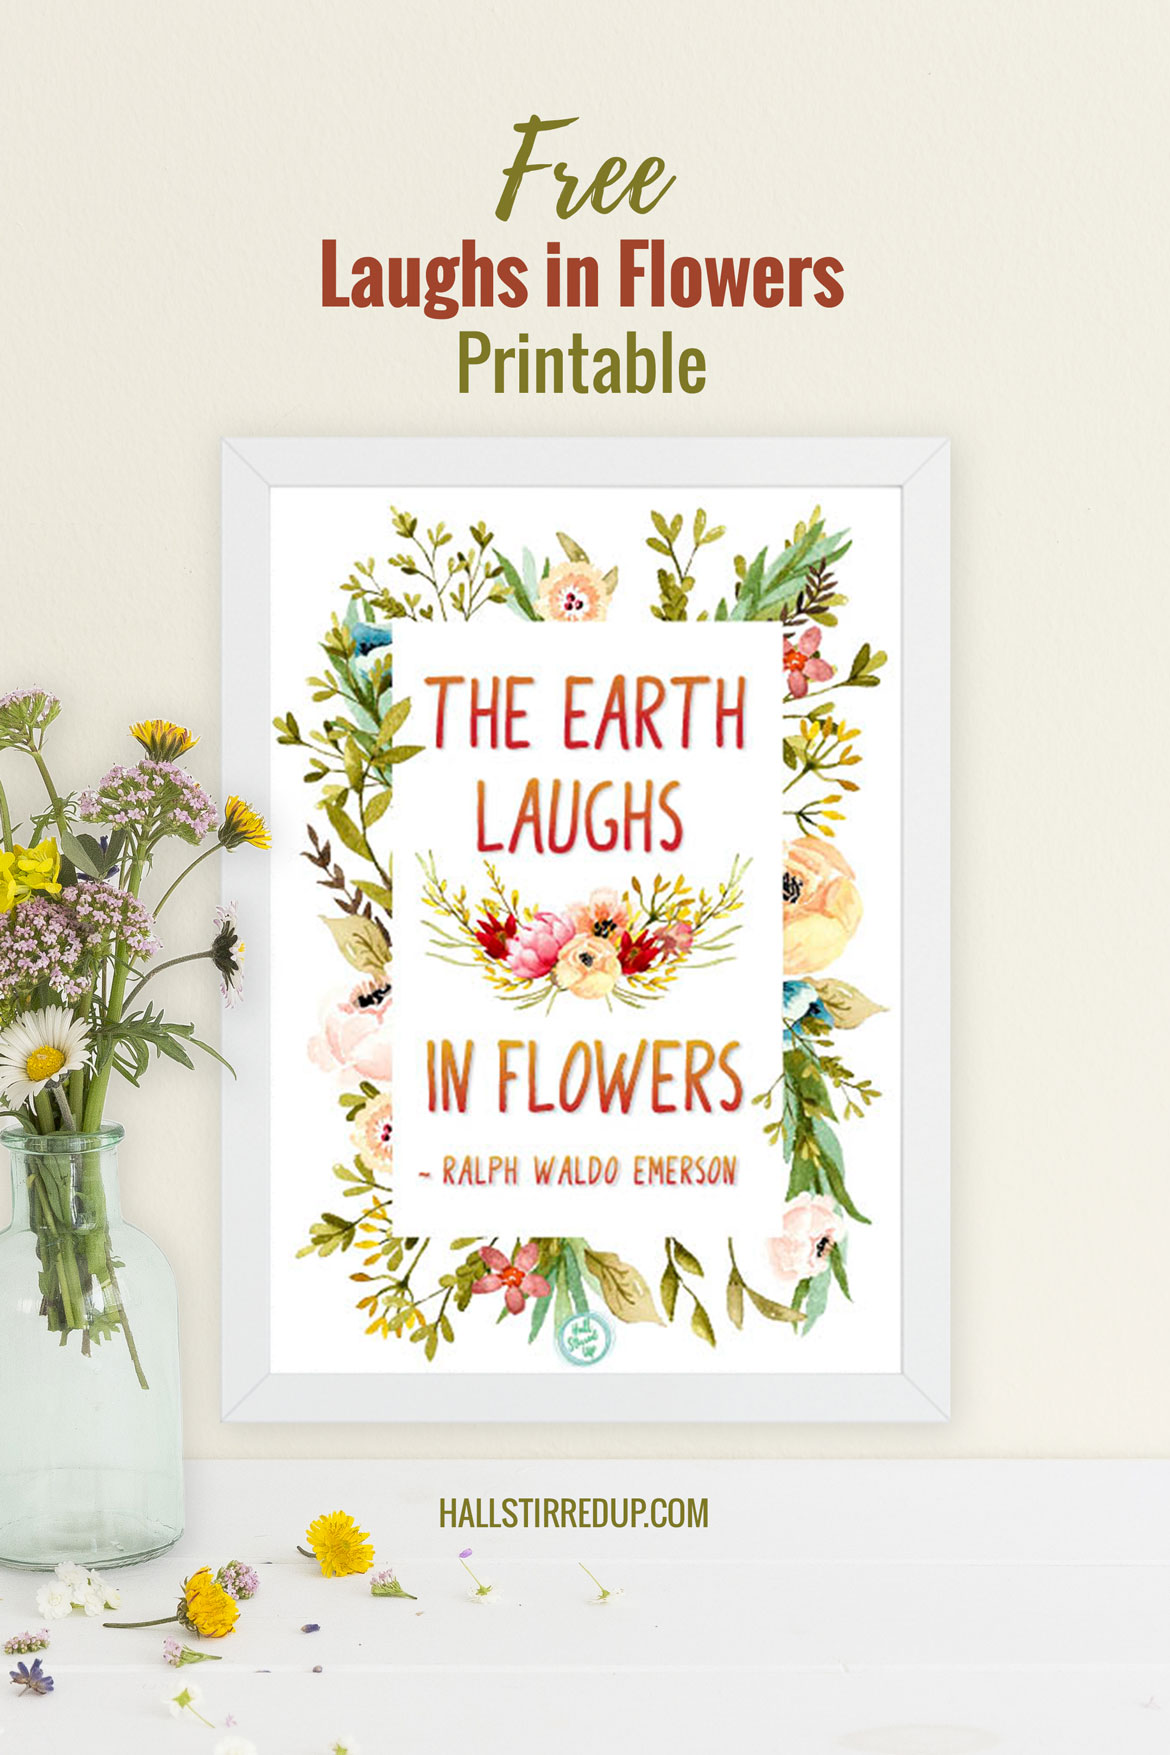 The Earth Laughs in Flowers - Free Printable from HallStirredUp.com